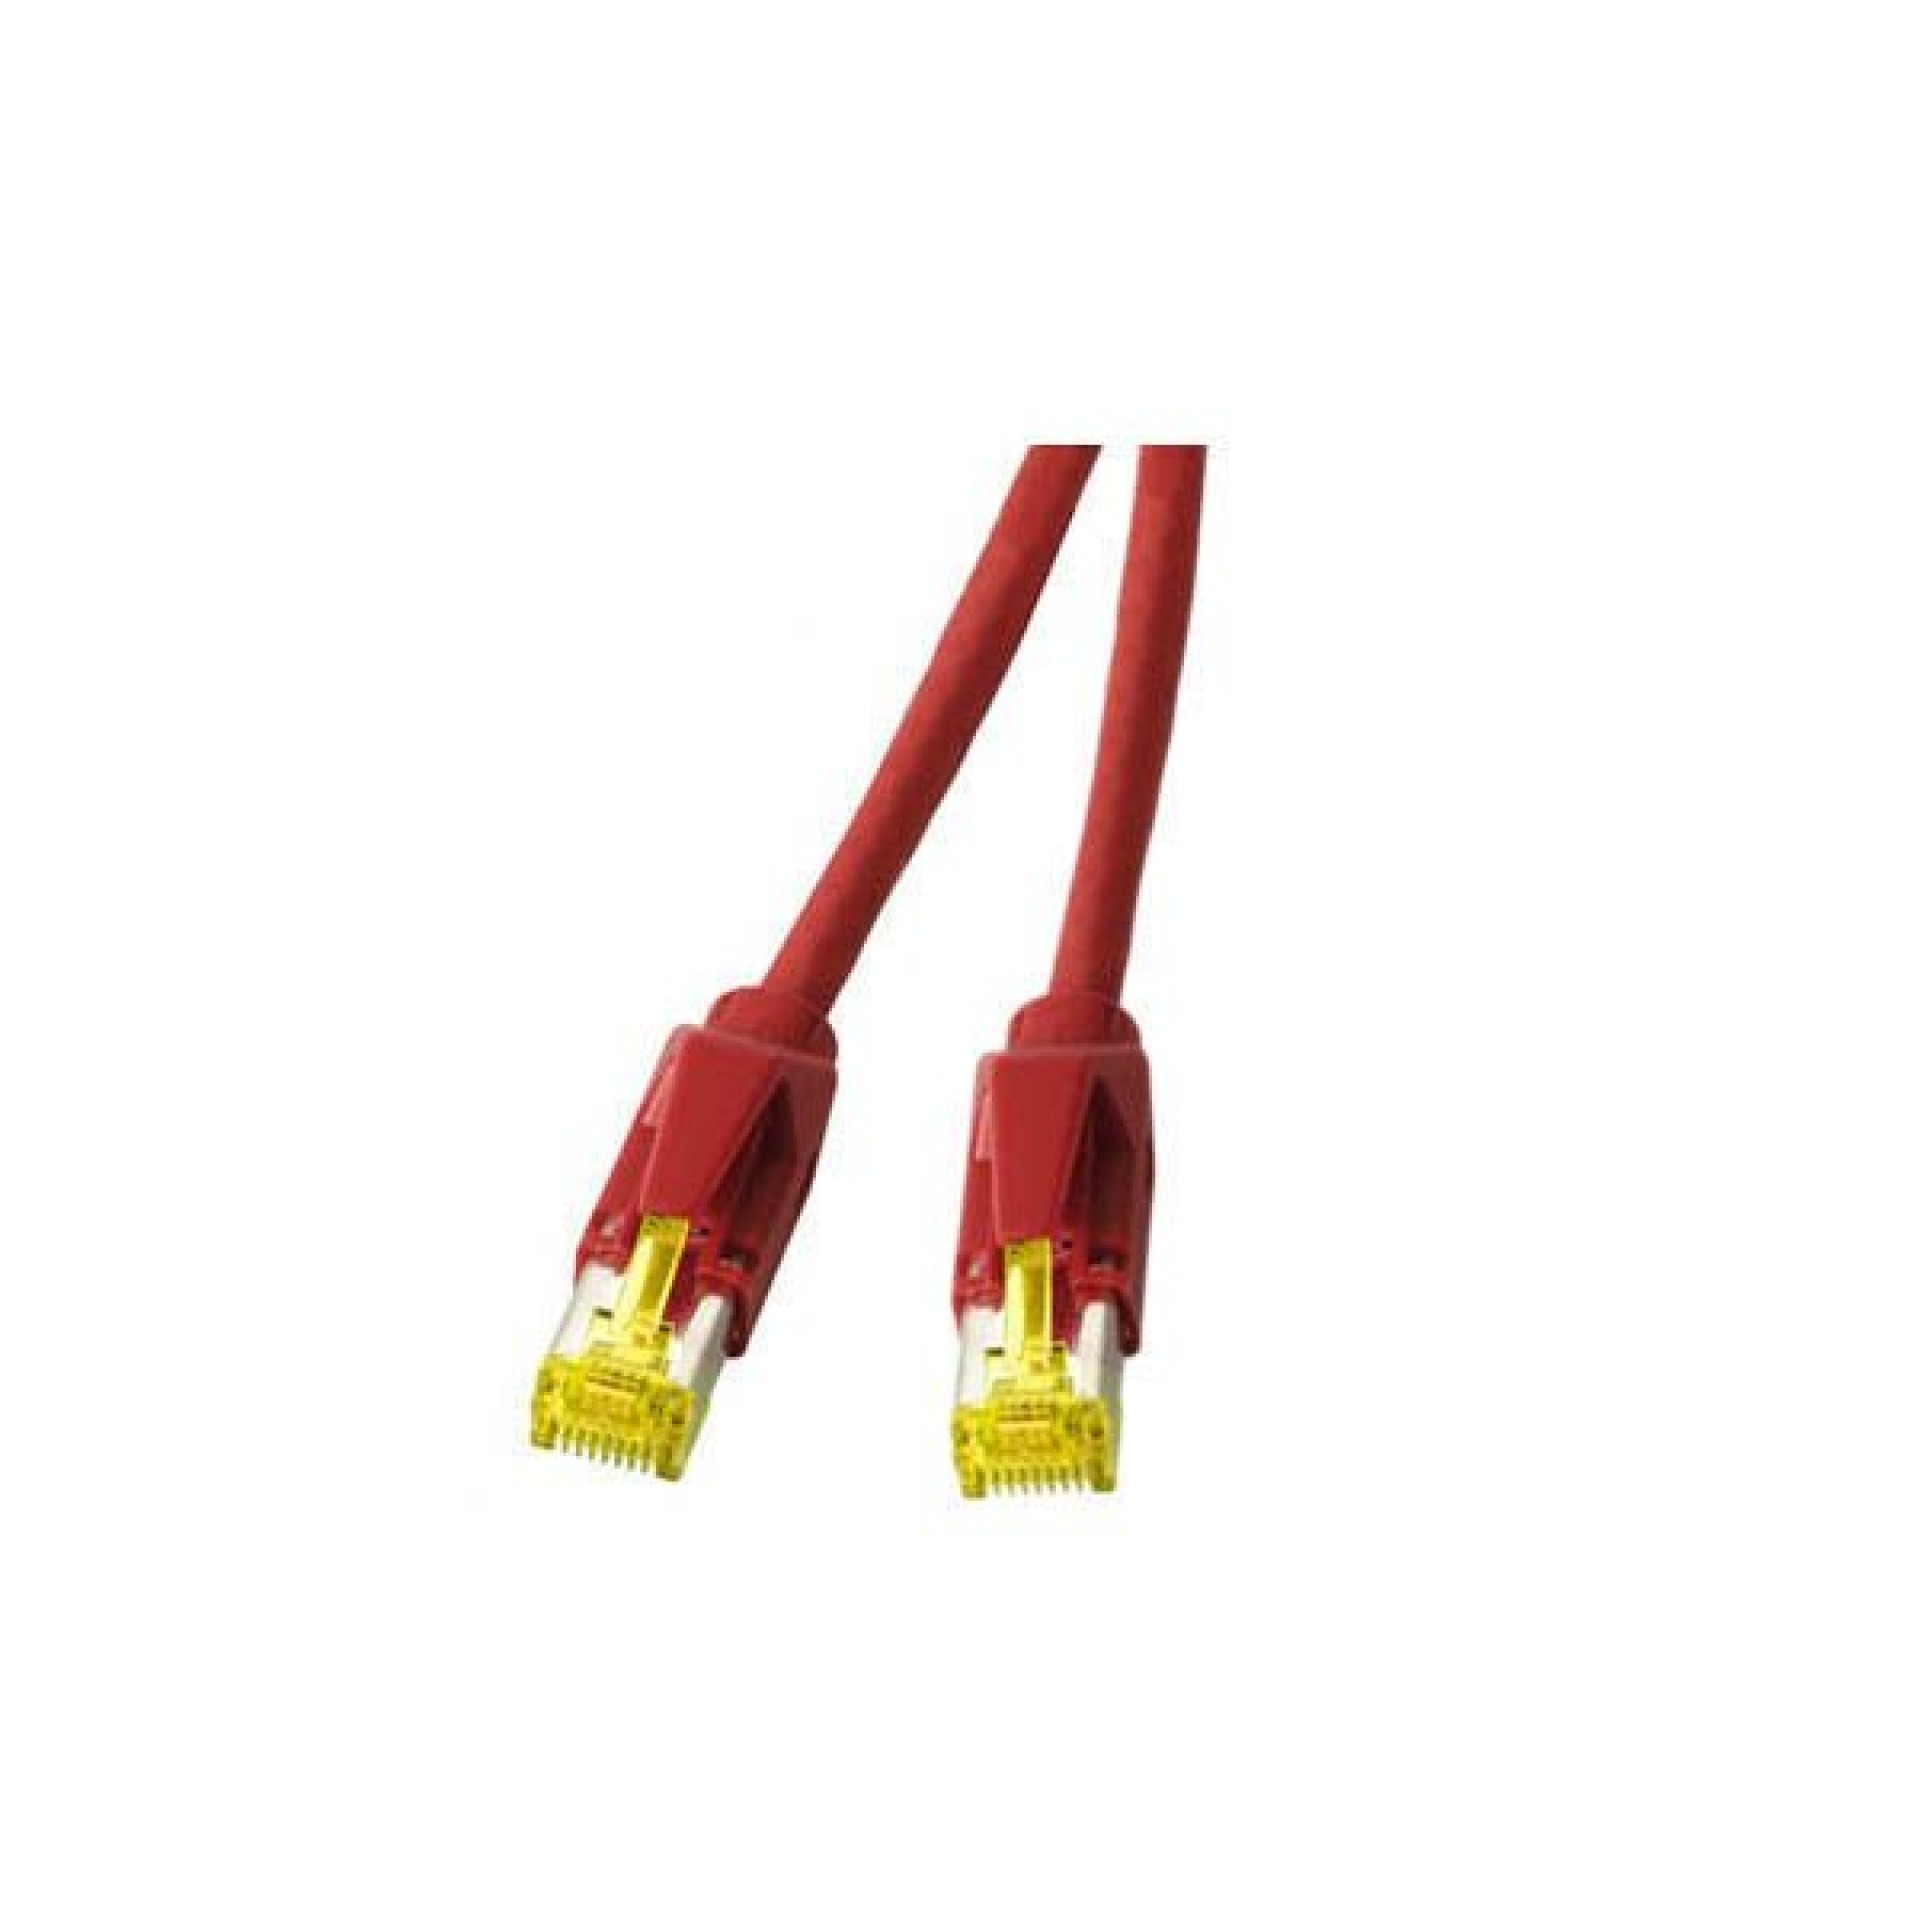 RJ45 Patch cable S/FTP, Cat.6A, TM31, Dätwyler 7702, 0,5m, red